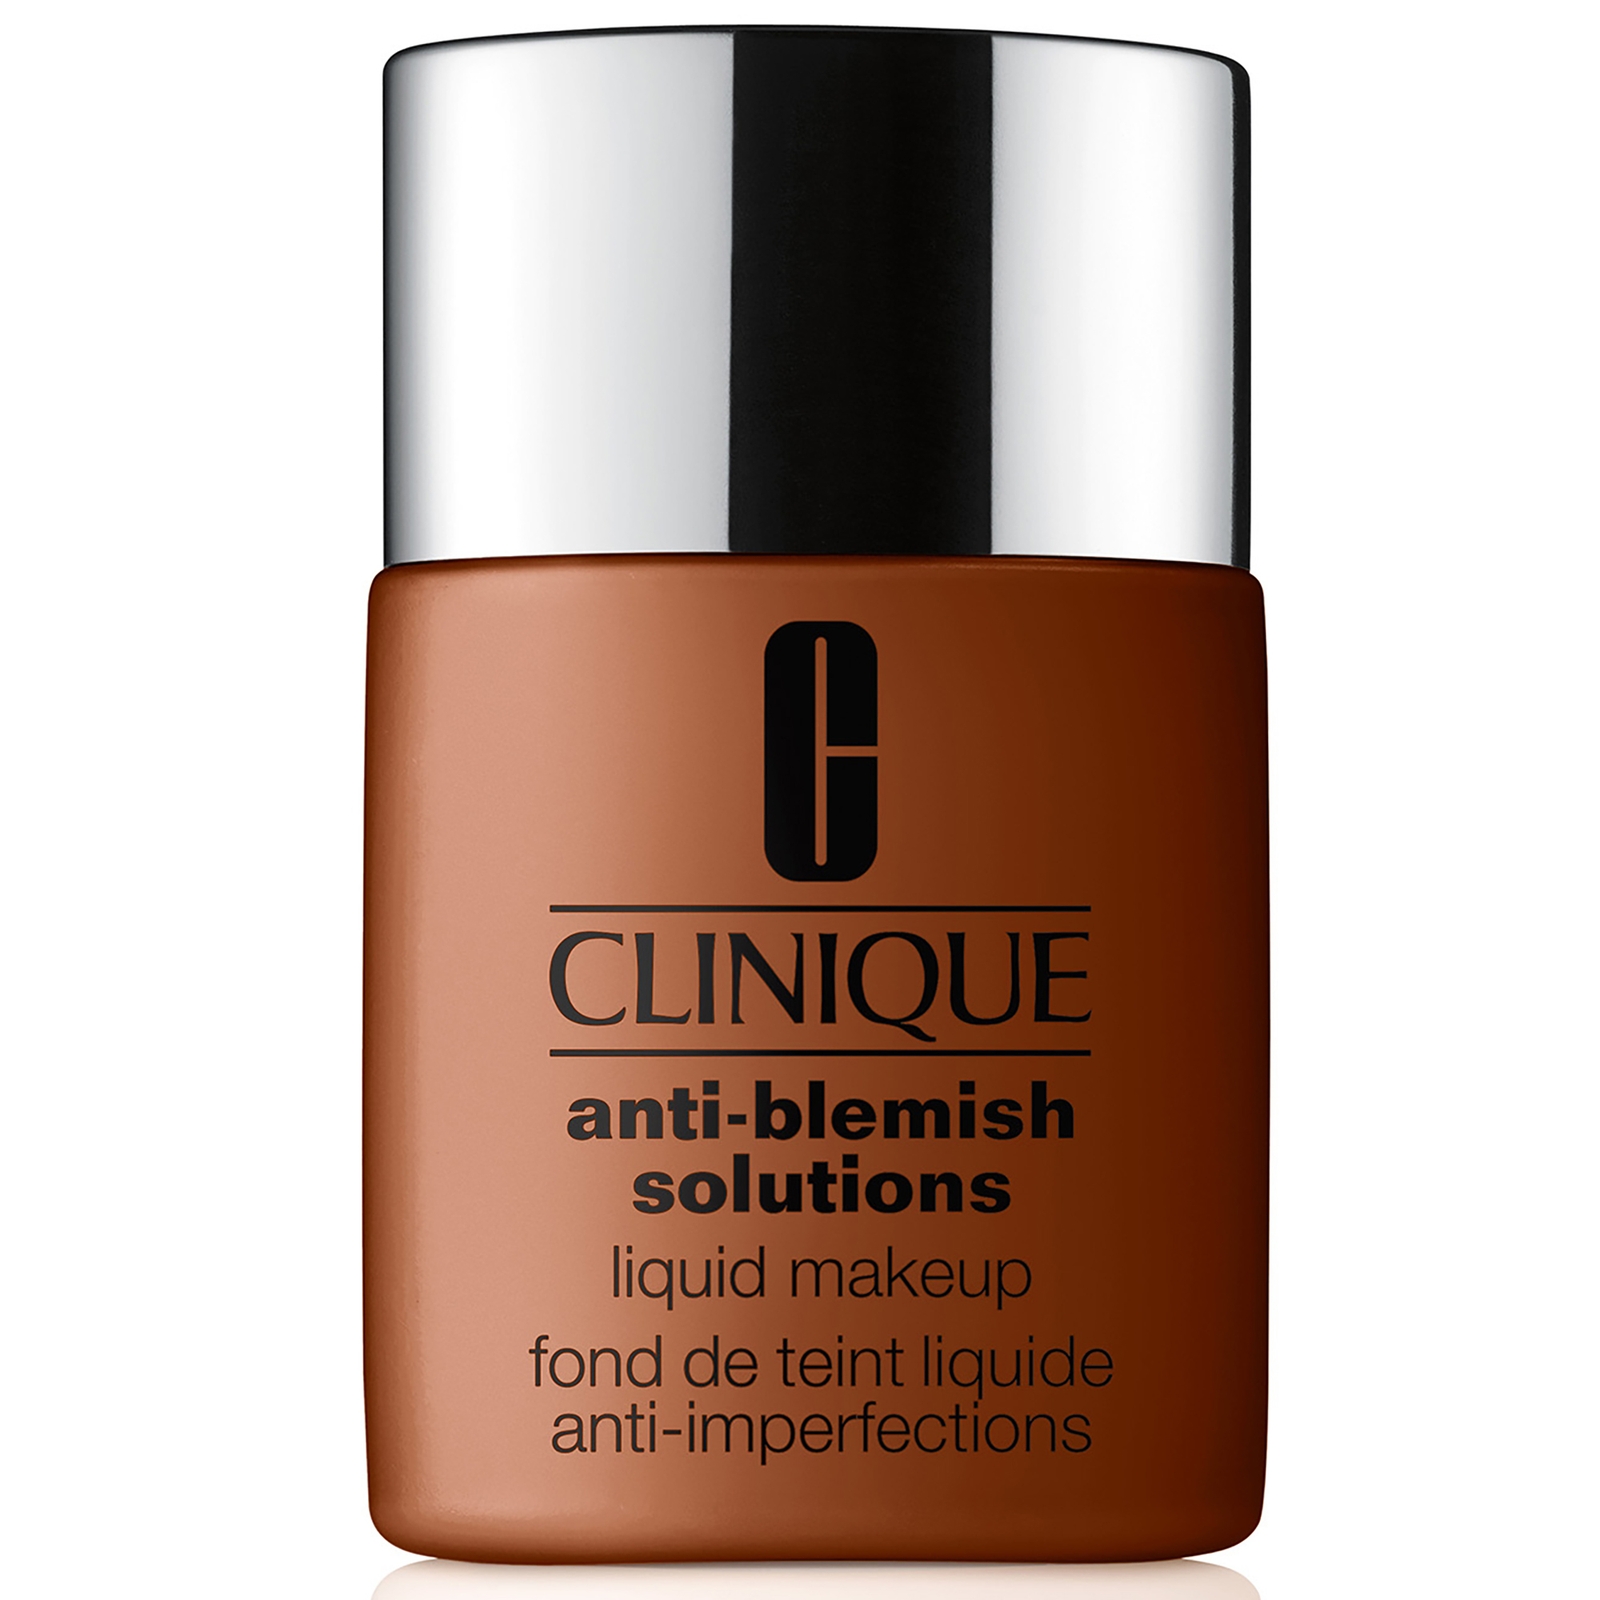 Image of Clinique Anti-Blemish Solutions Liquid Makeup with Salicylic Acid 30ml (Various Shades) - WN 122 Clove